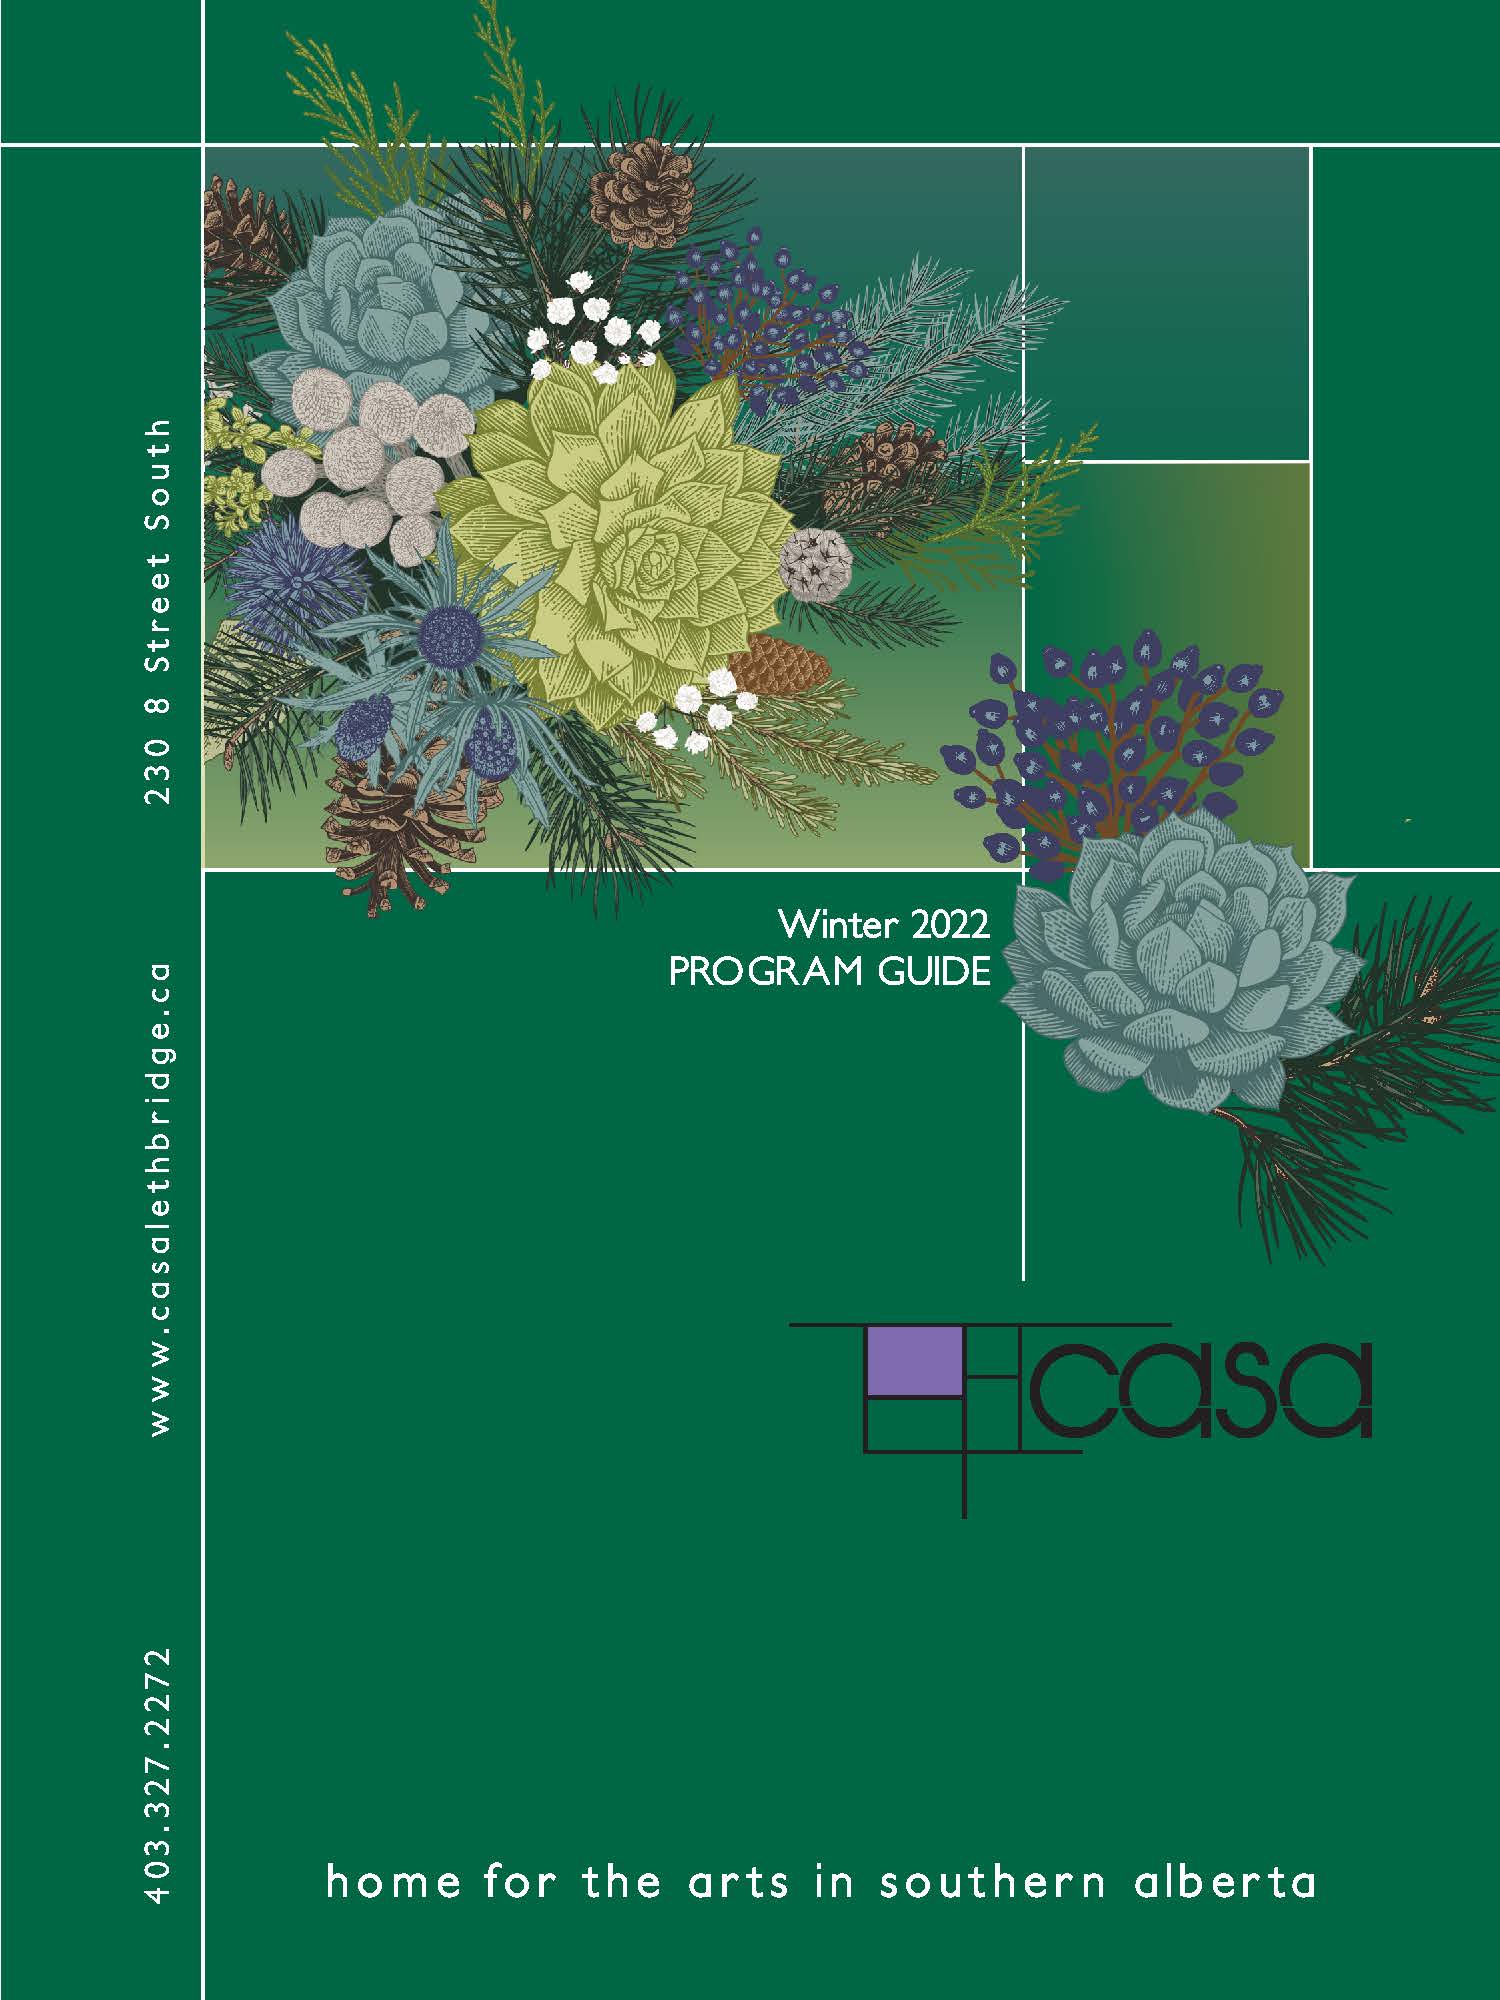 Pine green cover of the Casa Guide sprinkled with succulents, pine cones and juniper berries.